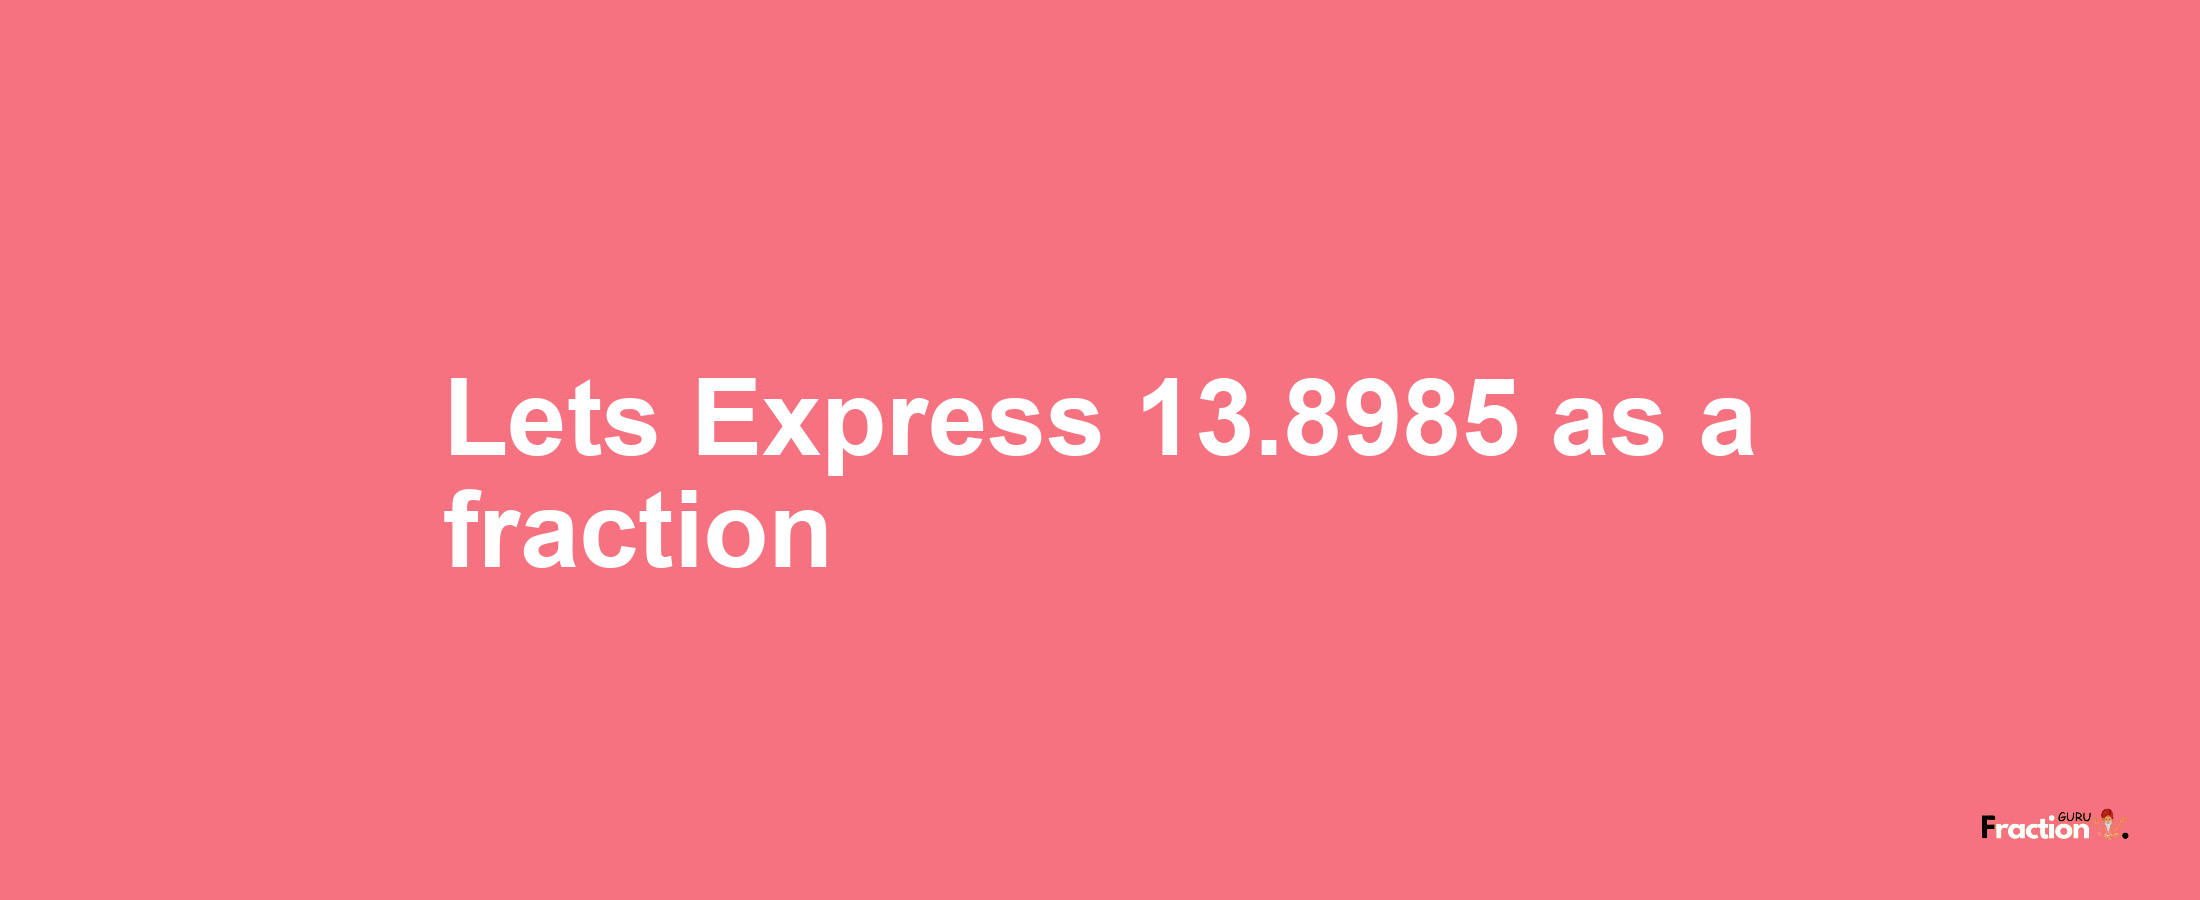 Lets Express 13.8985 as afraction